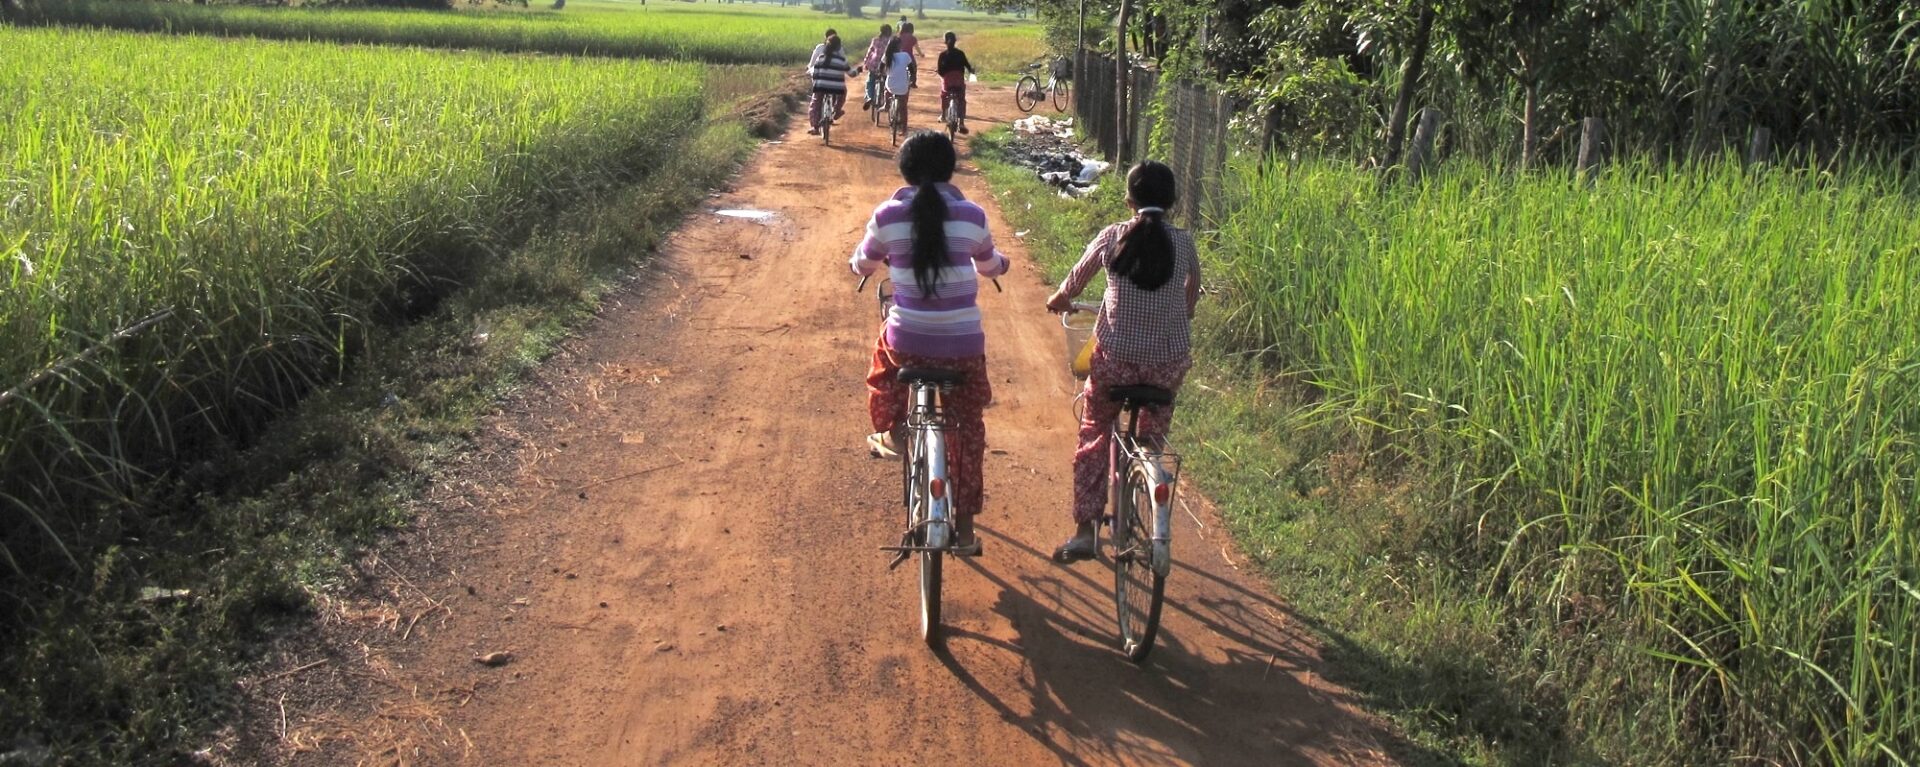 cambodia cycle tours